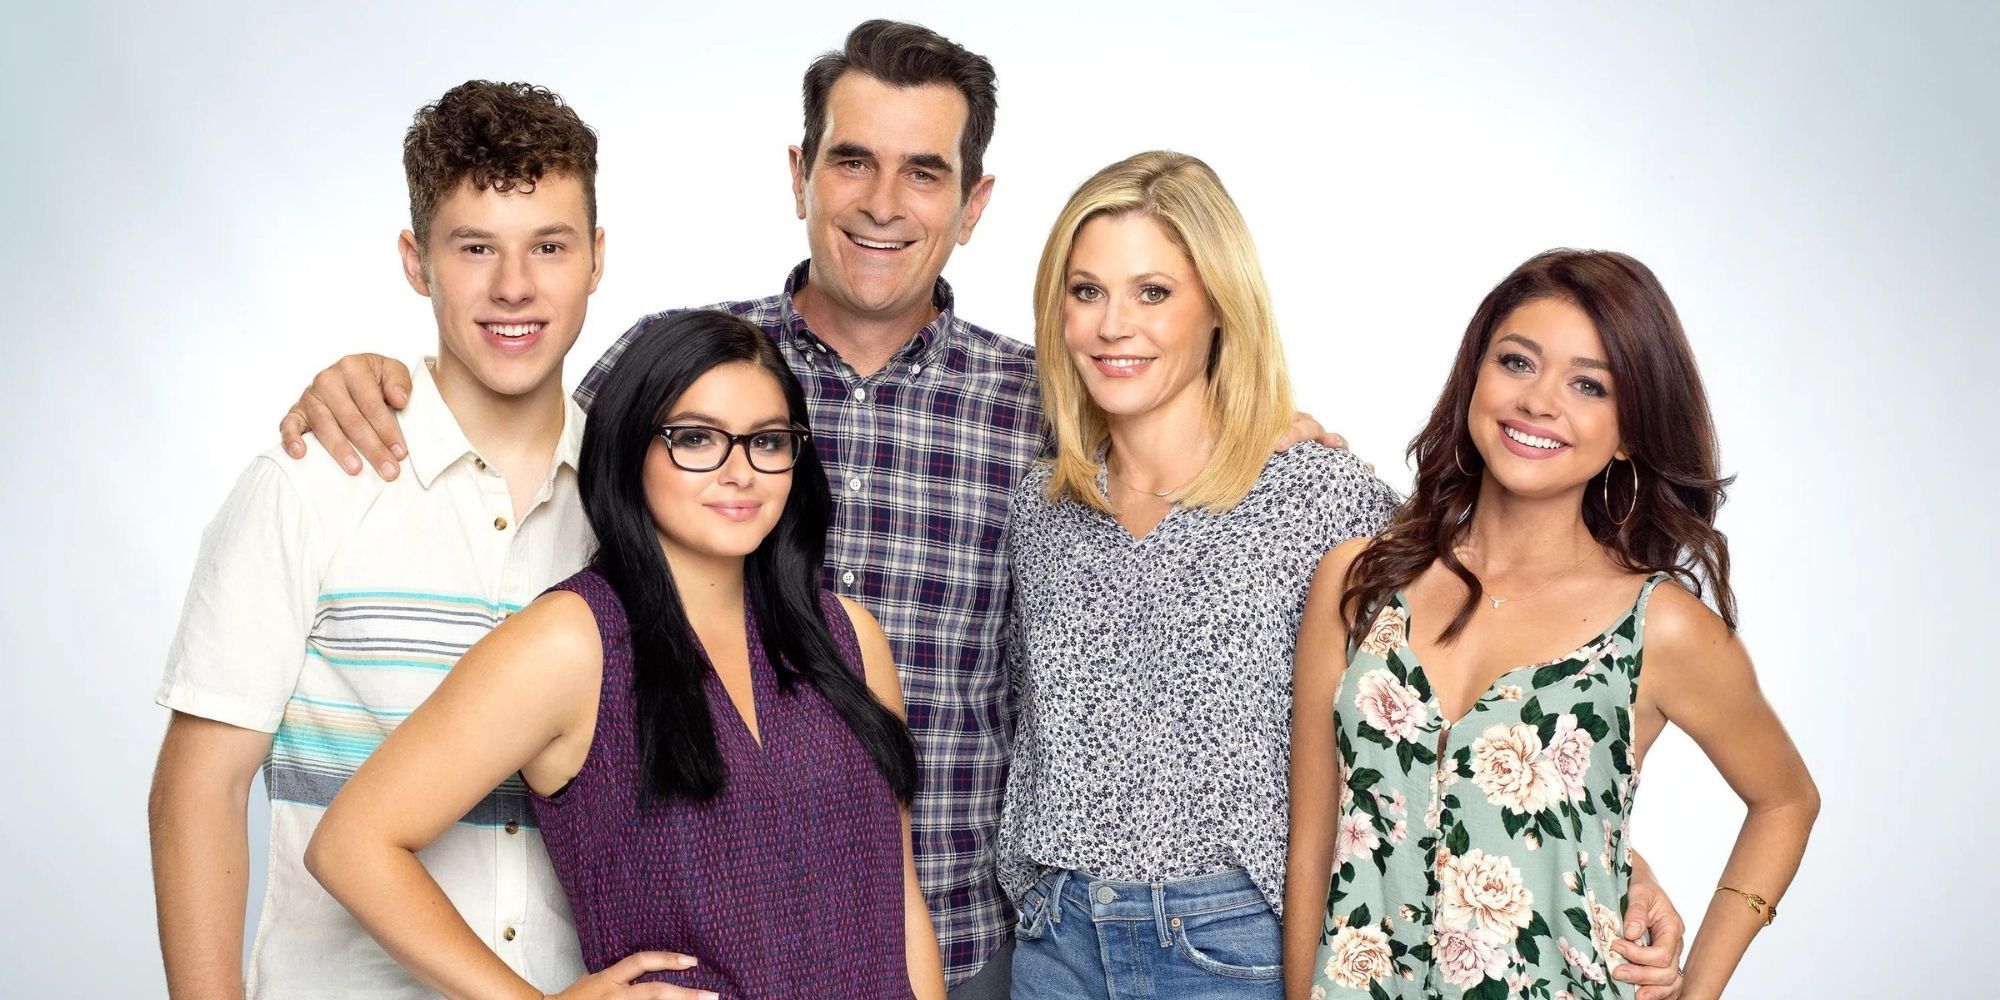 The cast of Modern Family standing together